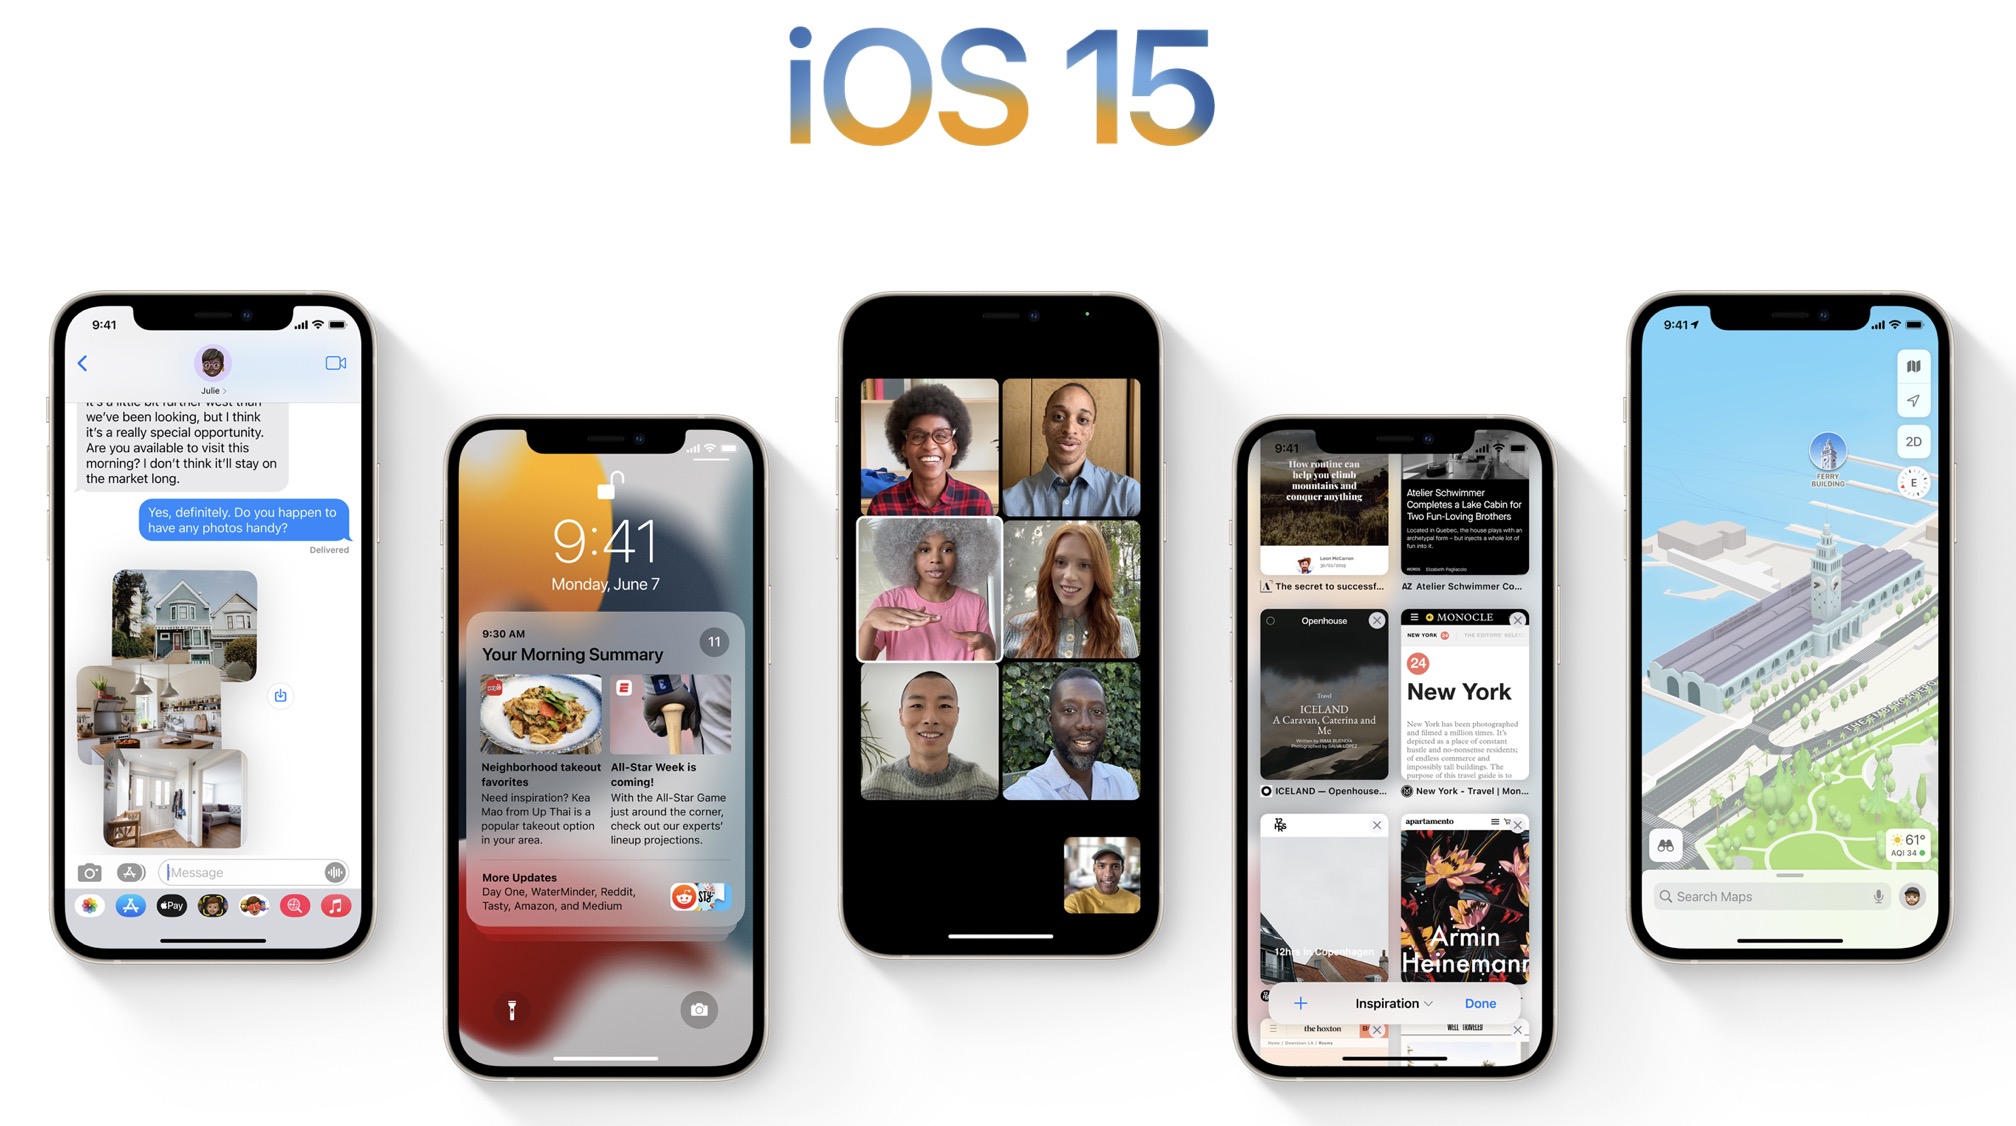 iPhone Models Supporting iOS 15